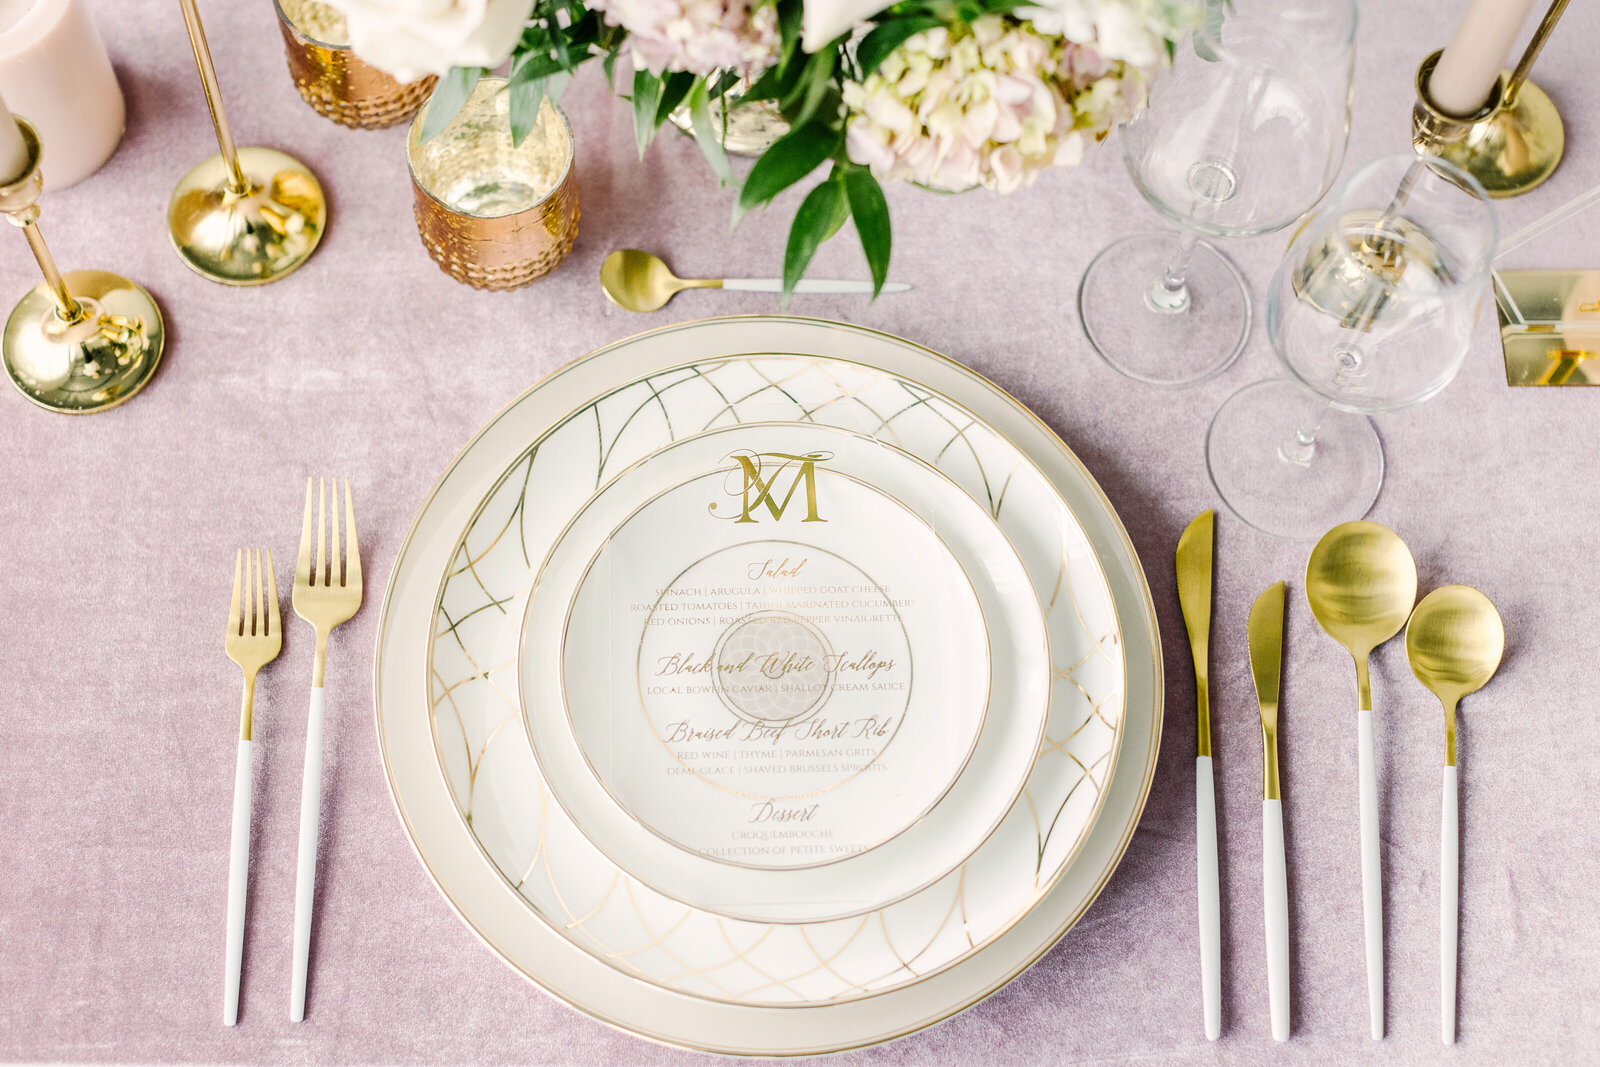 white and gold wedding plating with the letters J and M engraved on the plates